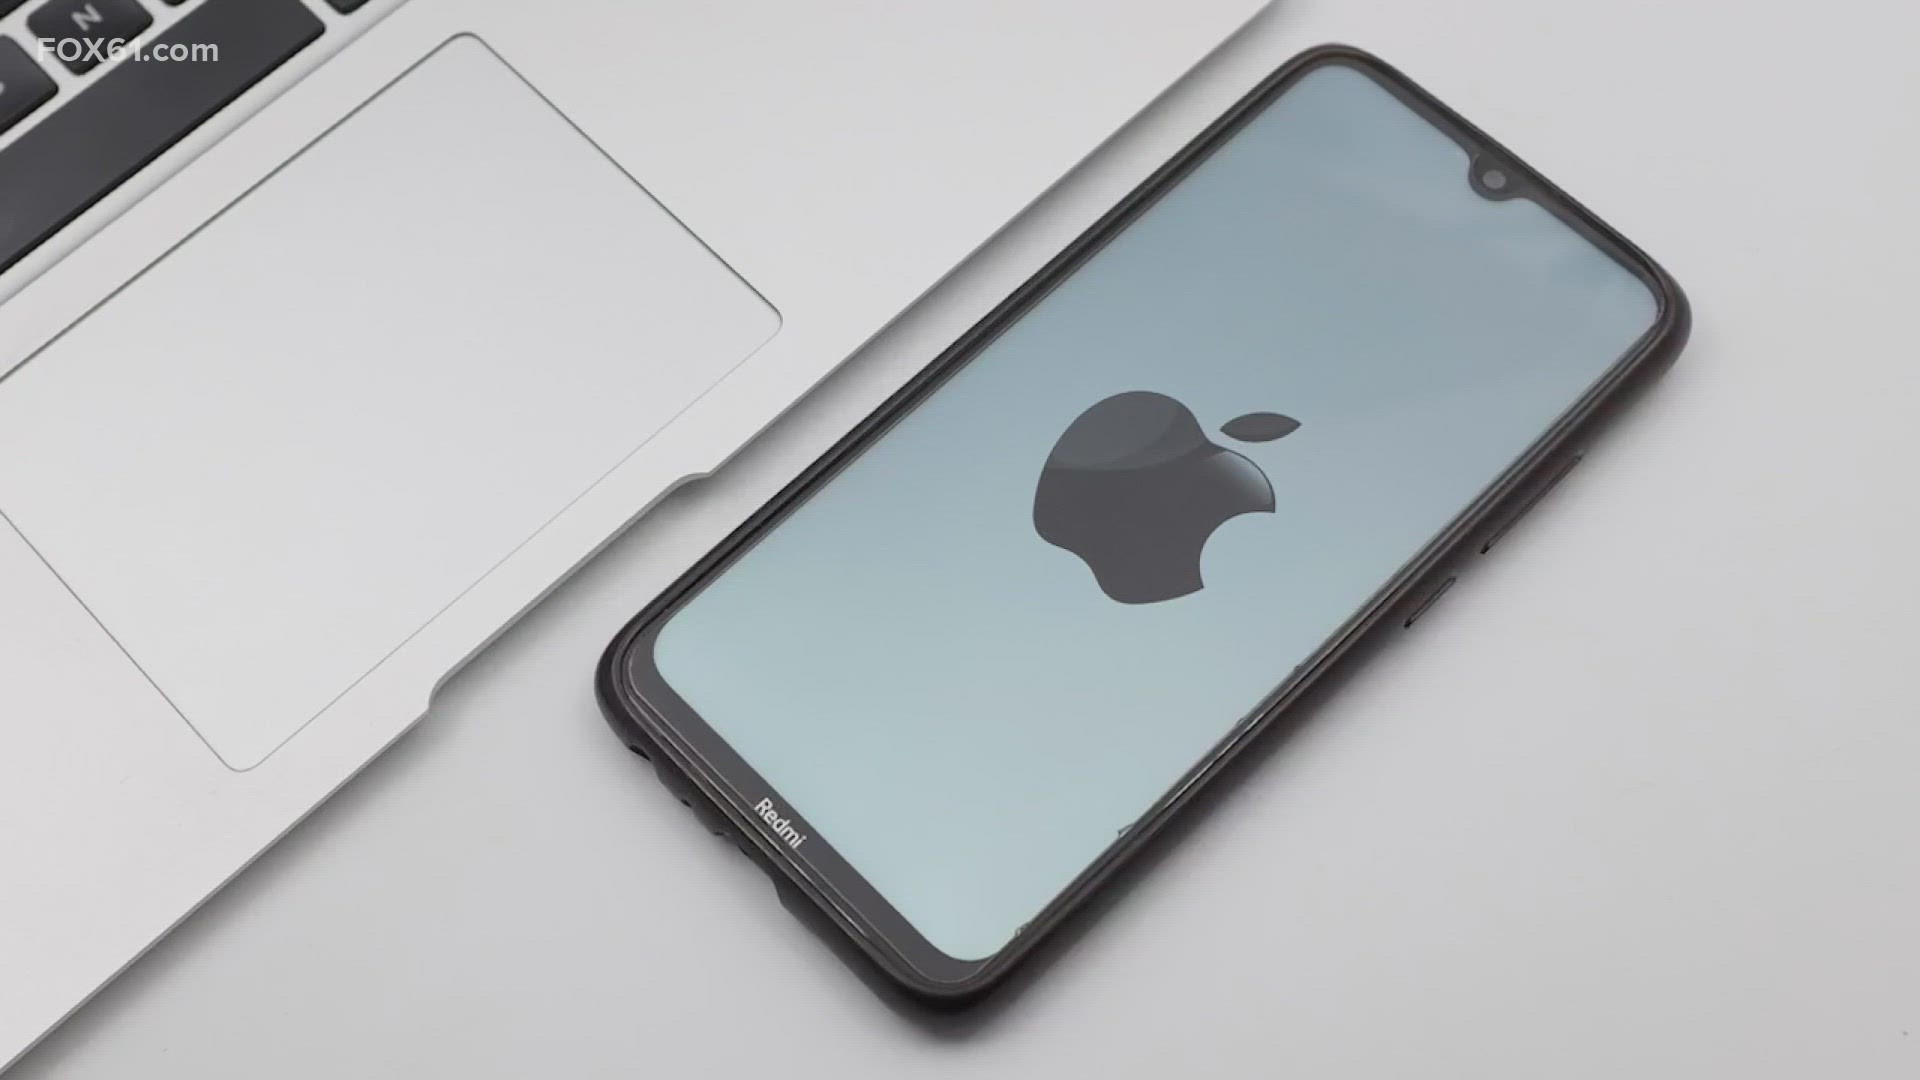 Attorney General Tong announced Thursday that Connecticut will join 15 other states and the Justice Department in the suit alleging Apple's monopolization.